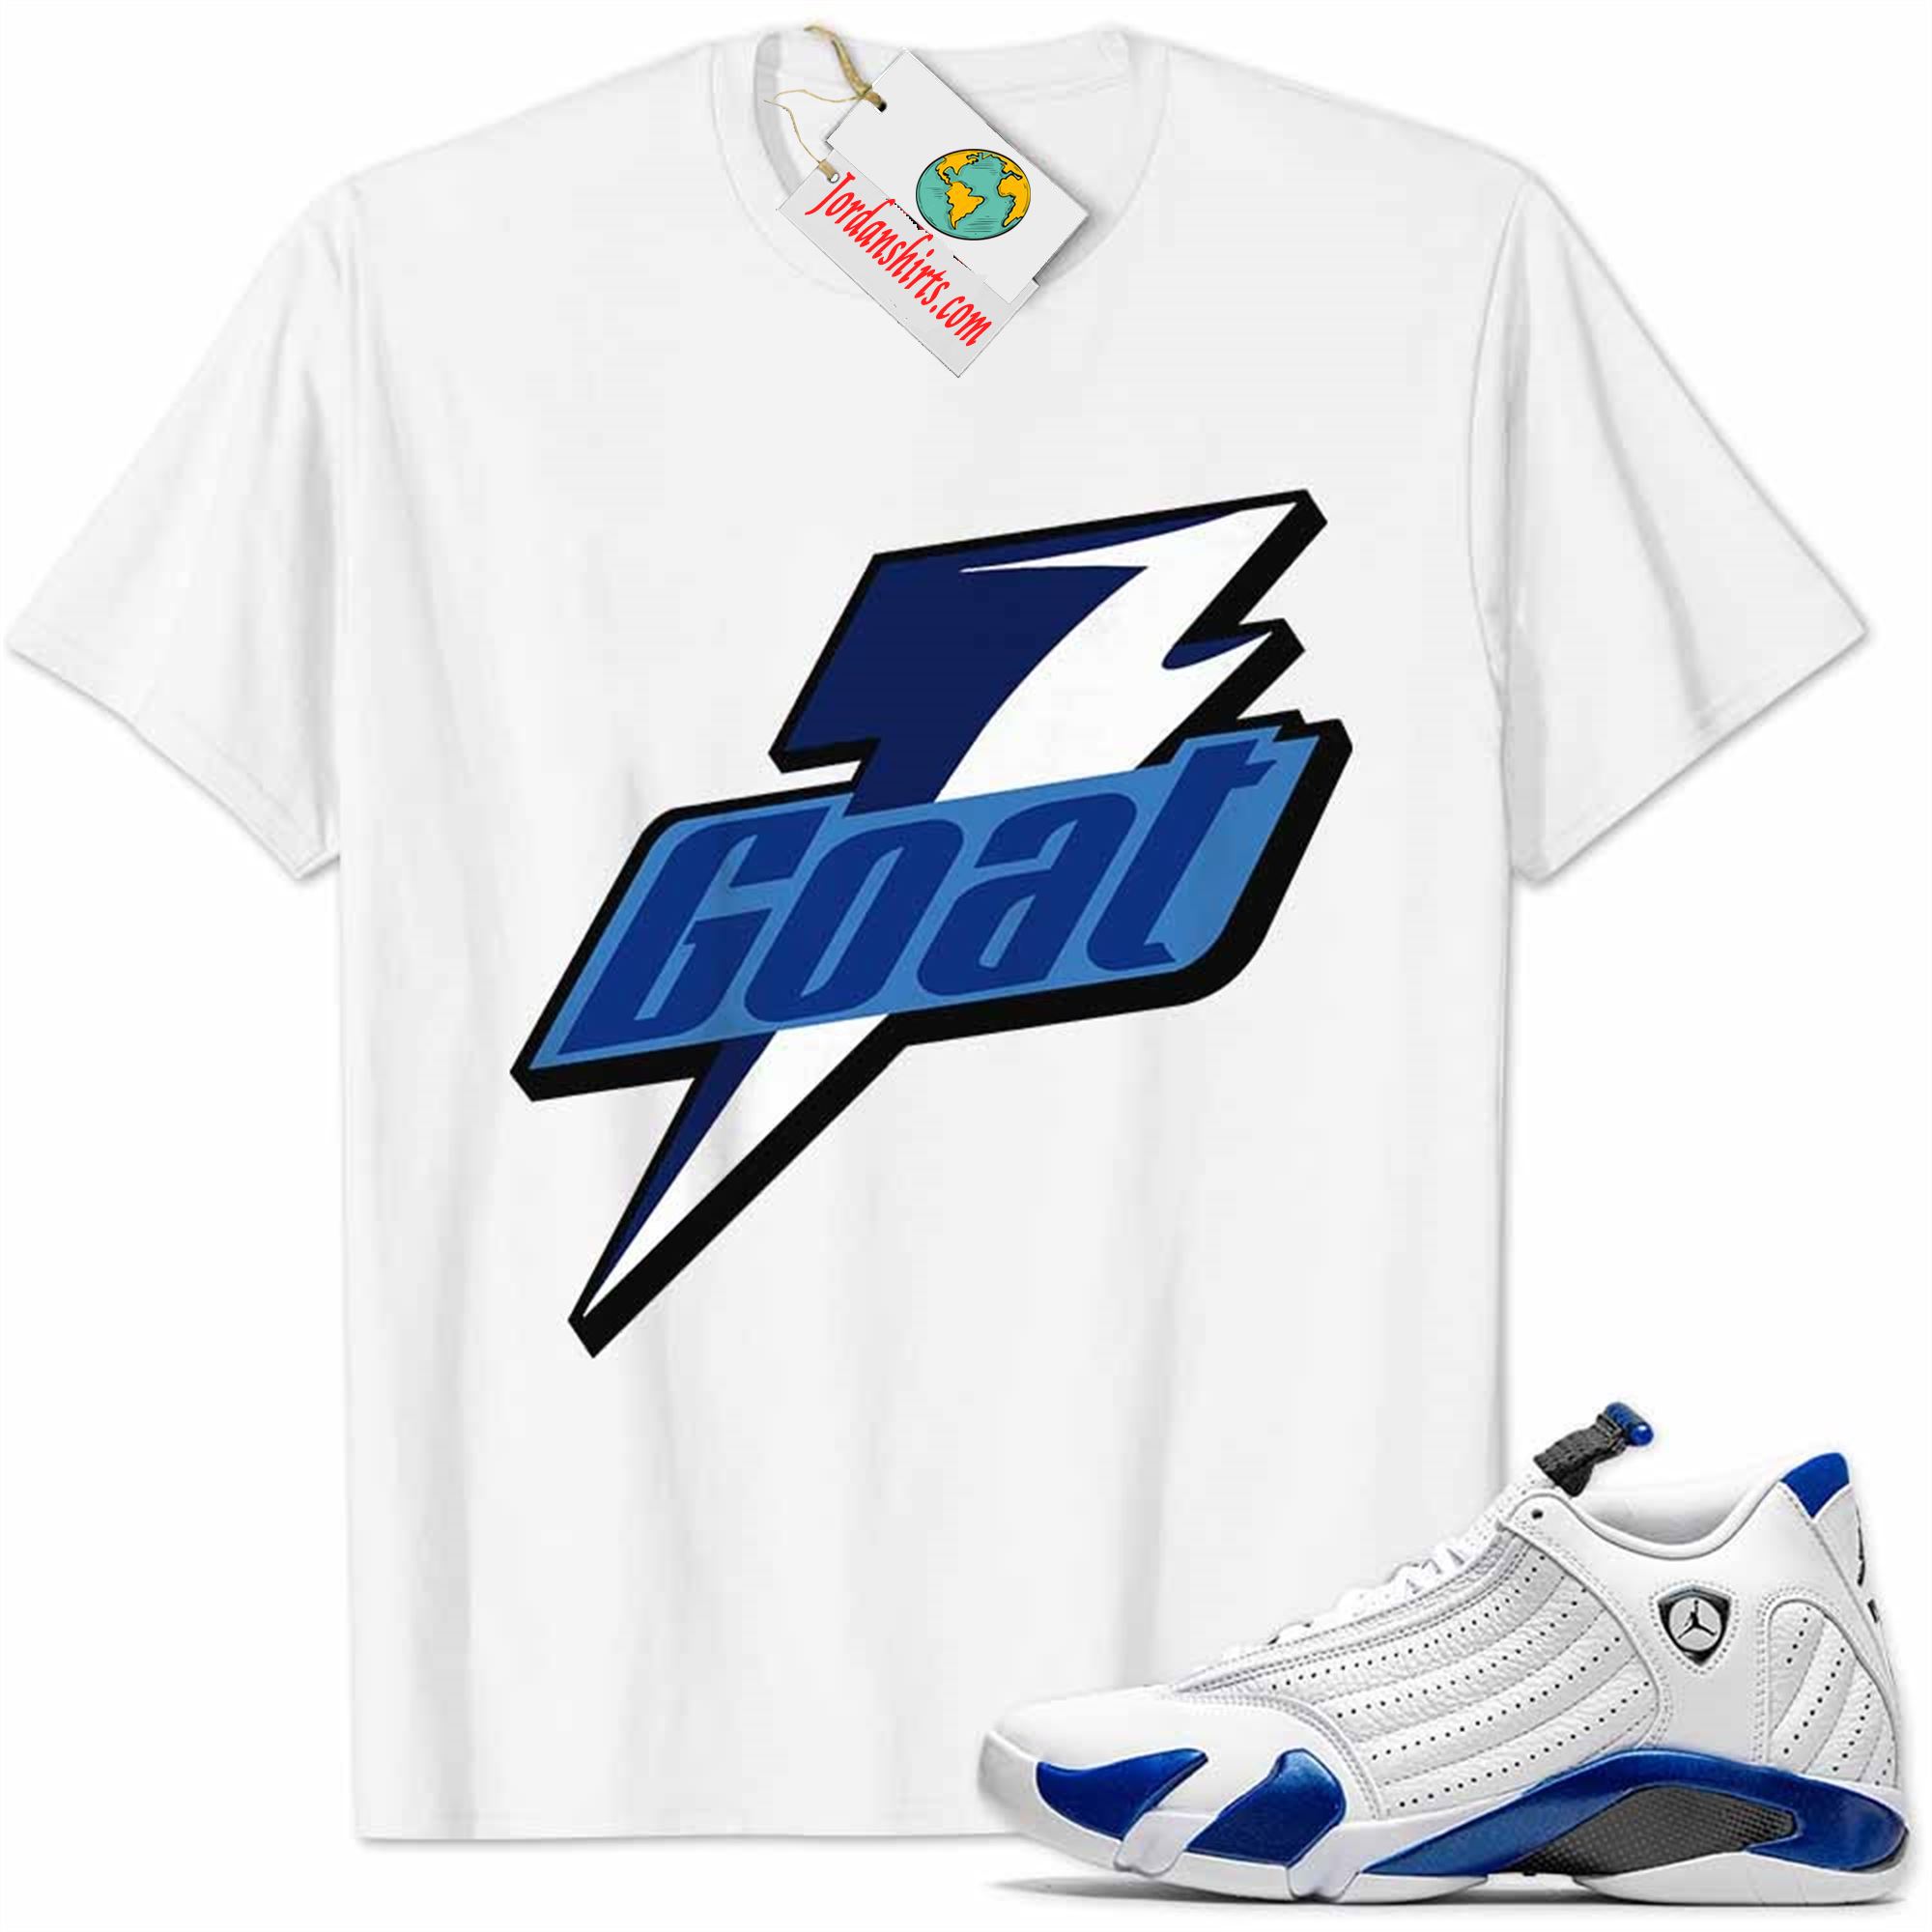 Jordan 14 Shirt, Hyper Royal 14s Shirt Goat Greatest Of All Time White Plus Size Up To 5xl